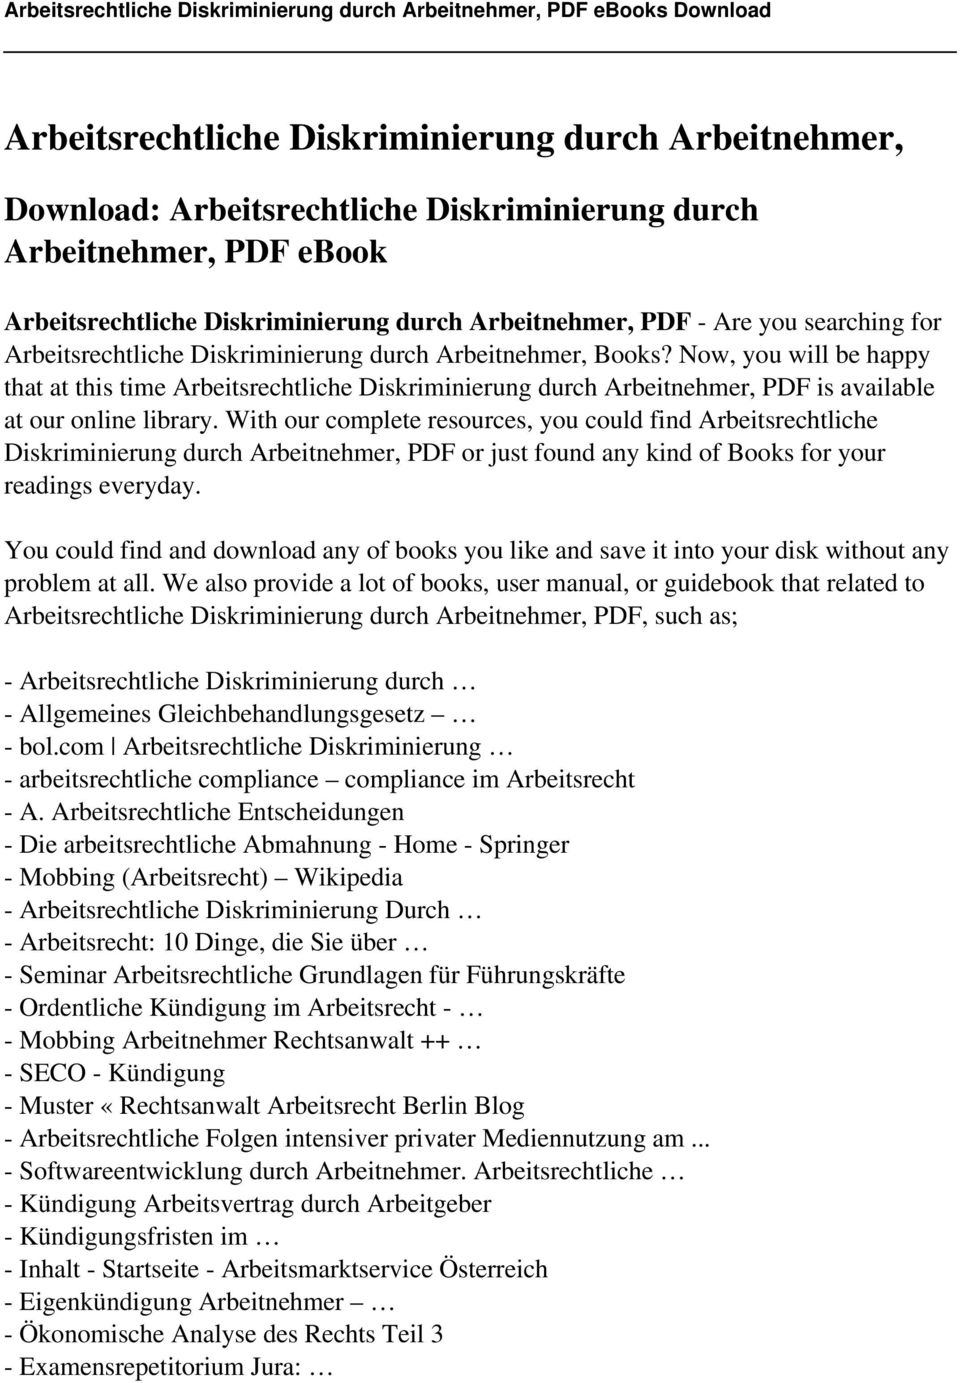 Now, you will be happy that at this time Arbeitsrechtliche Diskriminierung durch Arbeitnehmer, PDF is available at our online library.